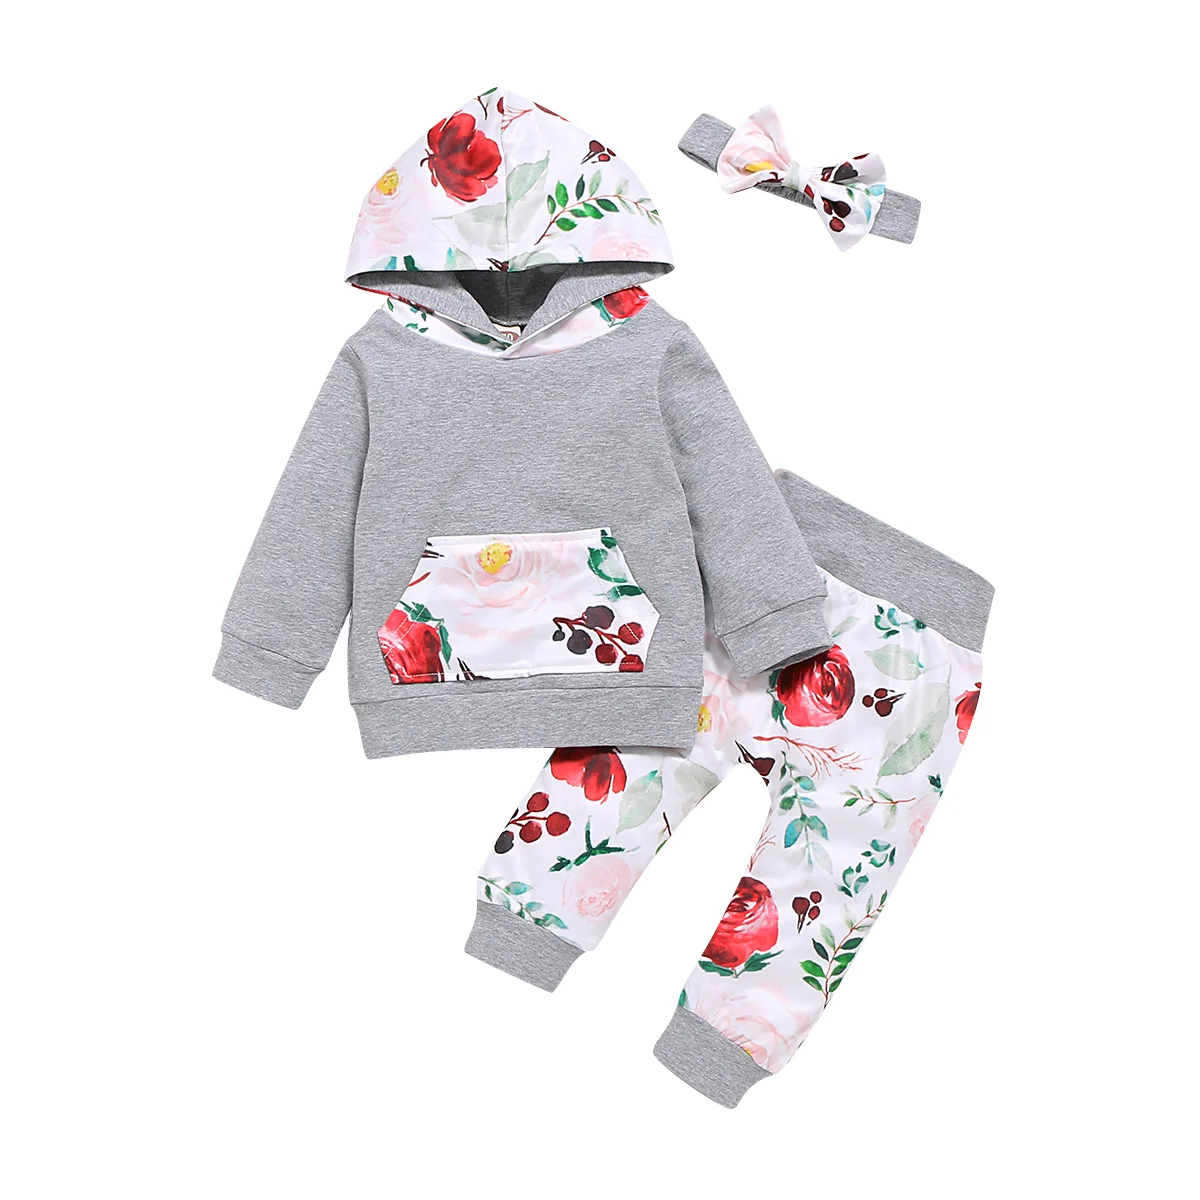 Toddler Girl Clothes Long Sleeve Flowers Hoodie Tops And Pants With Pocket Headband Girl s Clothing Kids Set Wear Girl 6 9 Month